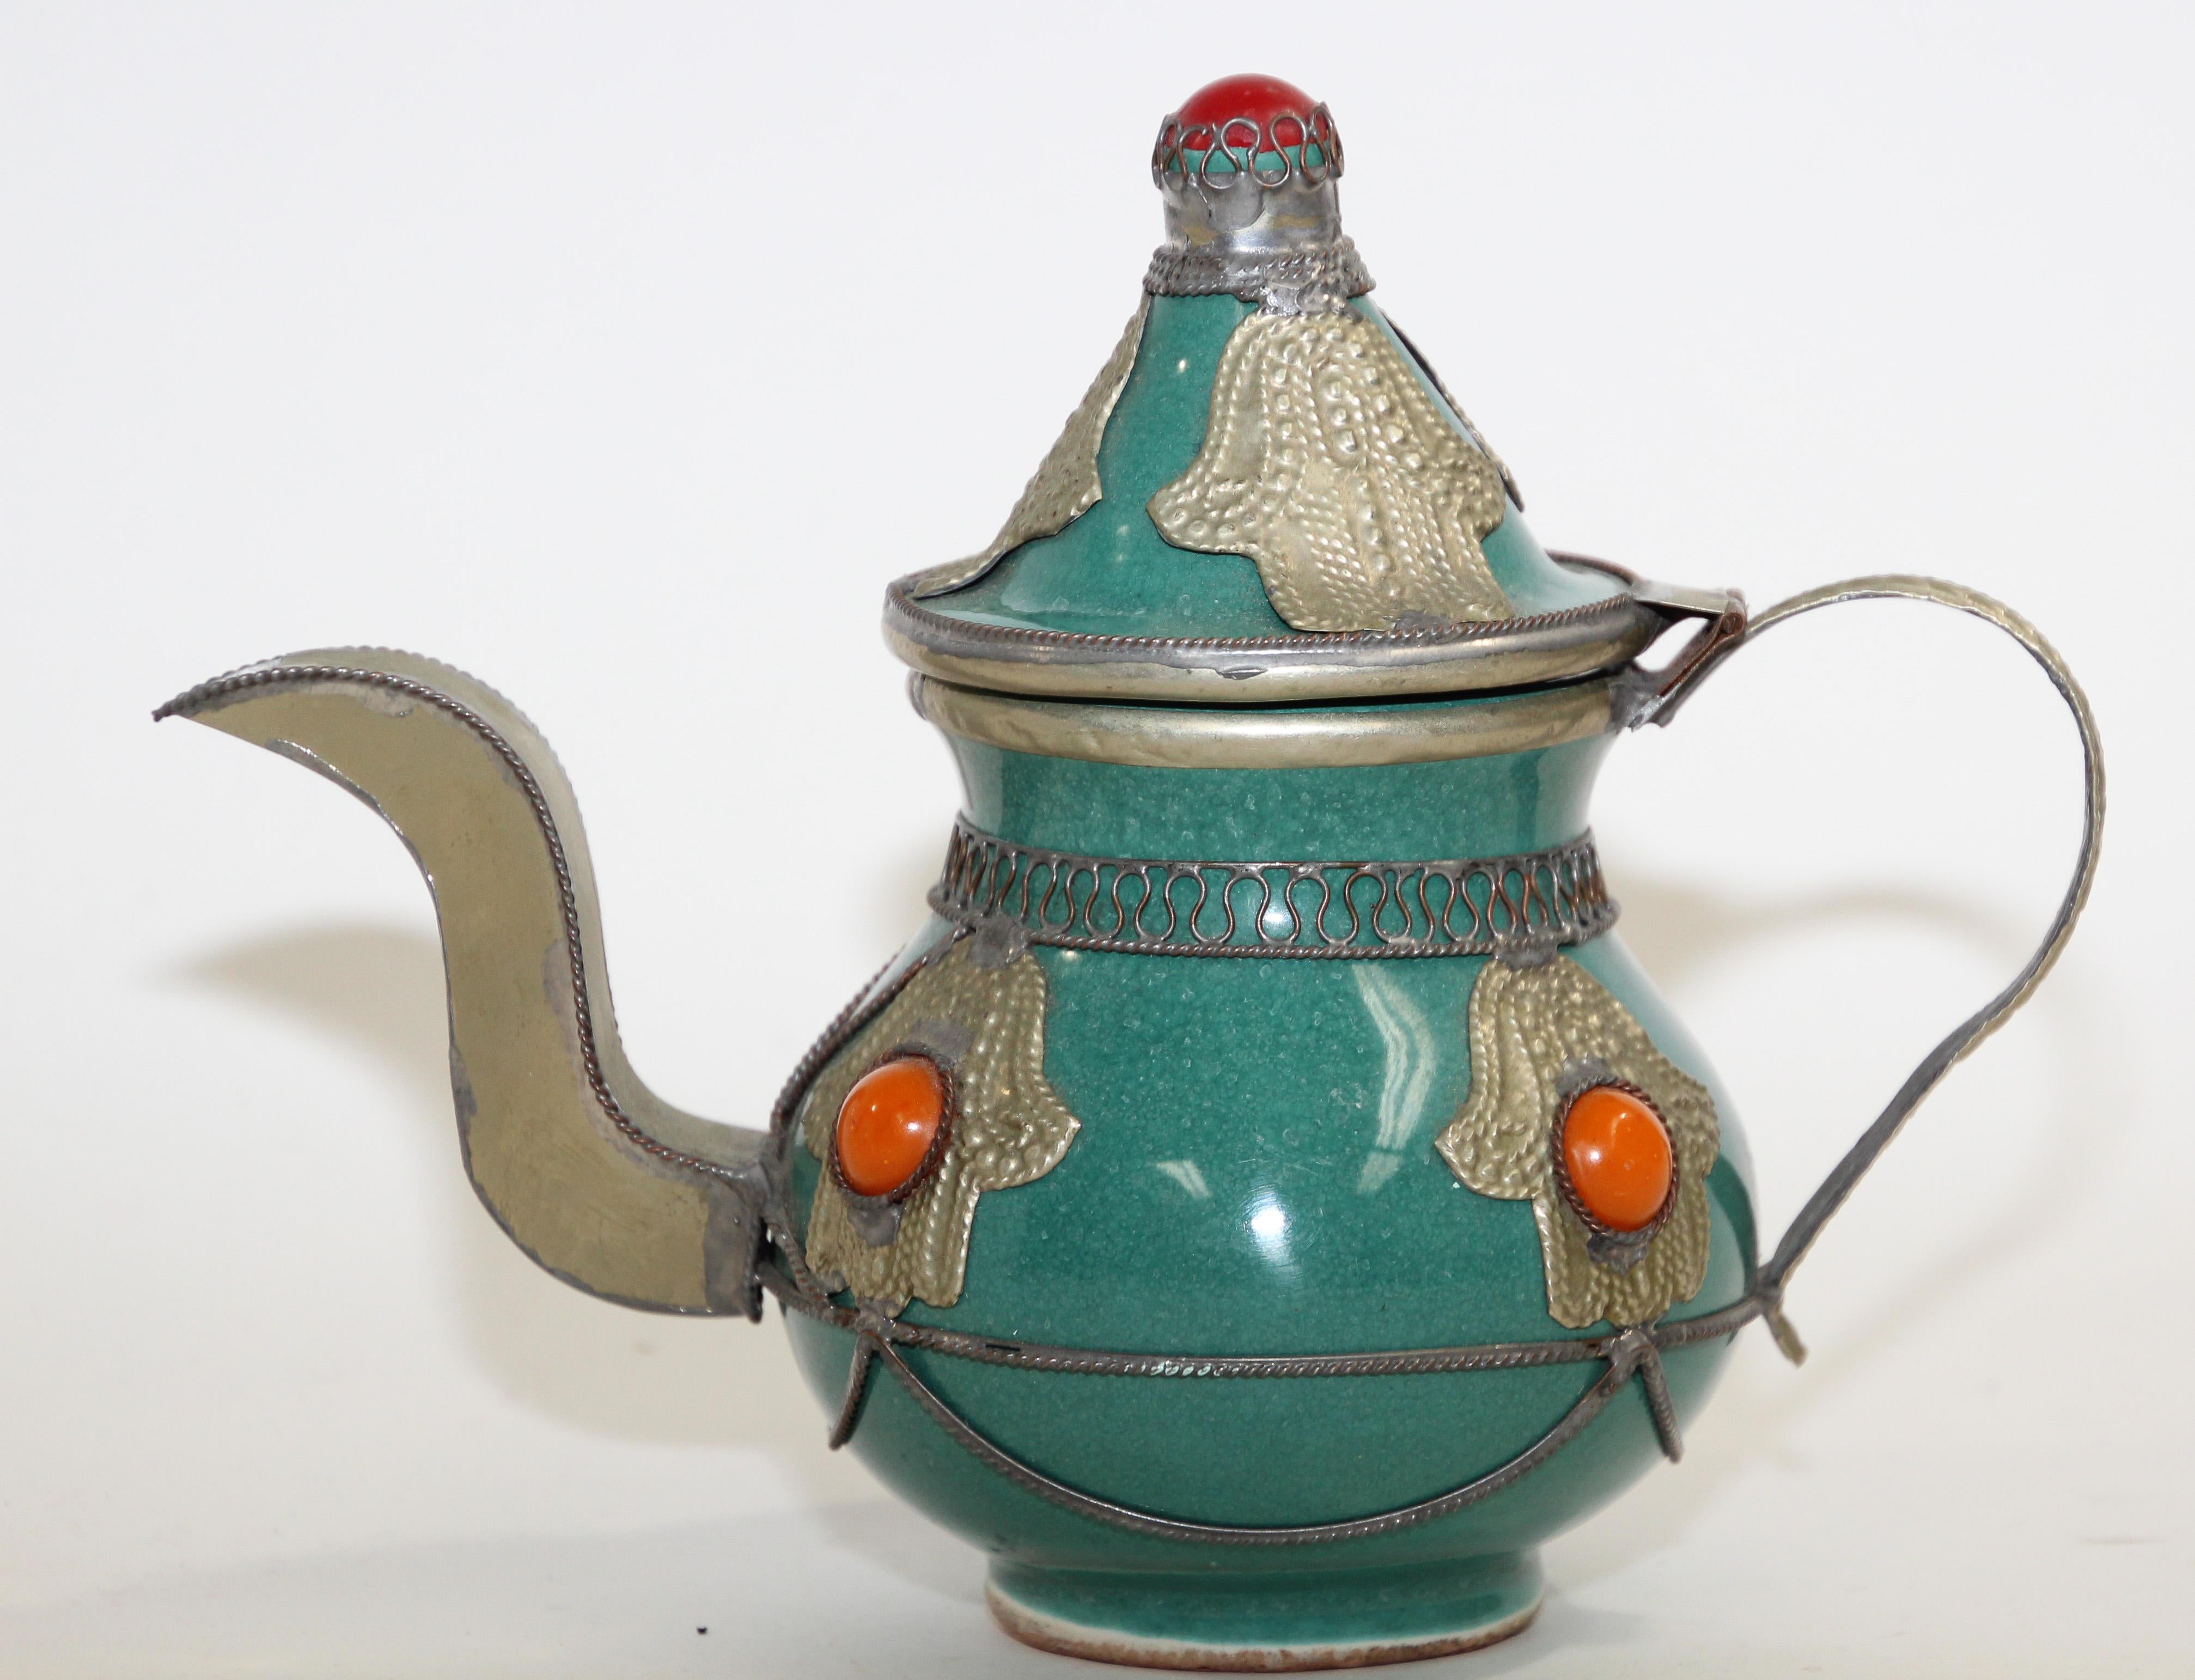 Traditional vintage blue teal color ceramic and silver metal filigree Moroccan tea pot.
Decorative tea pot with traditional overlay silver design with metal Khamsa, the protective Hand of Fatima and orange color stones, handcrafted in Fez.
Great